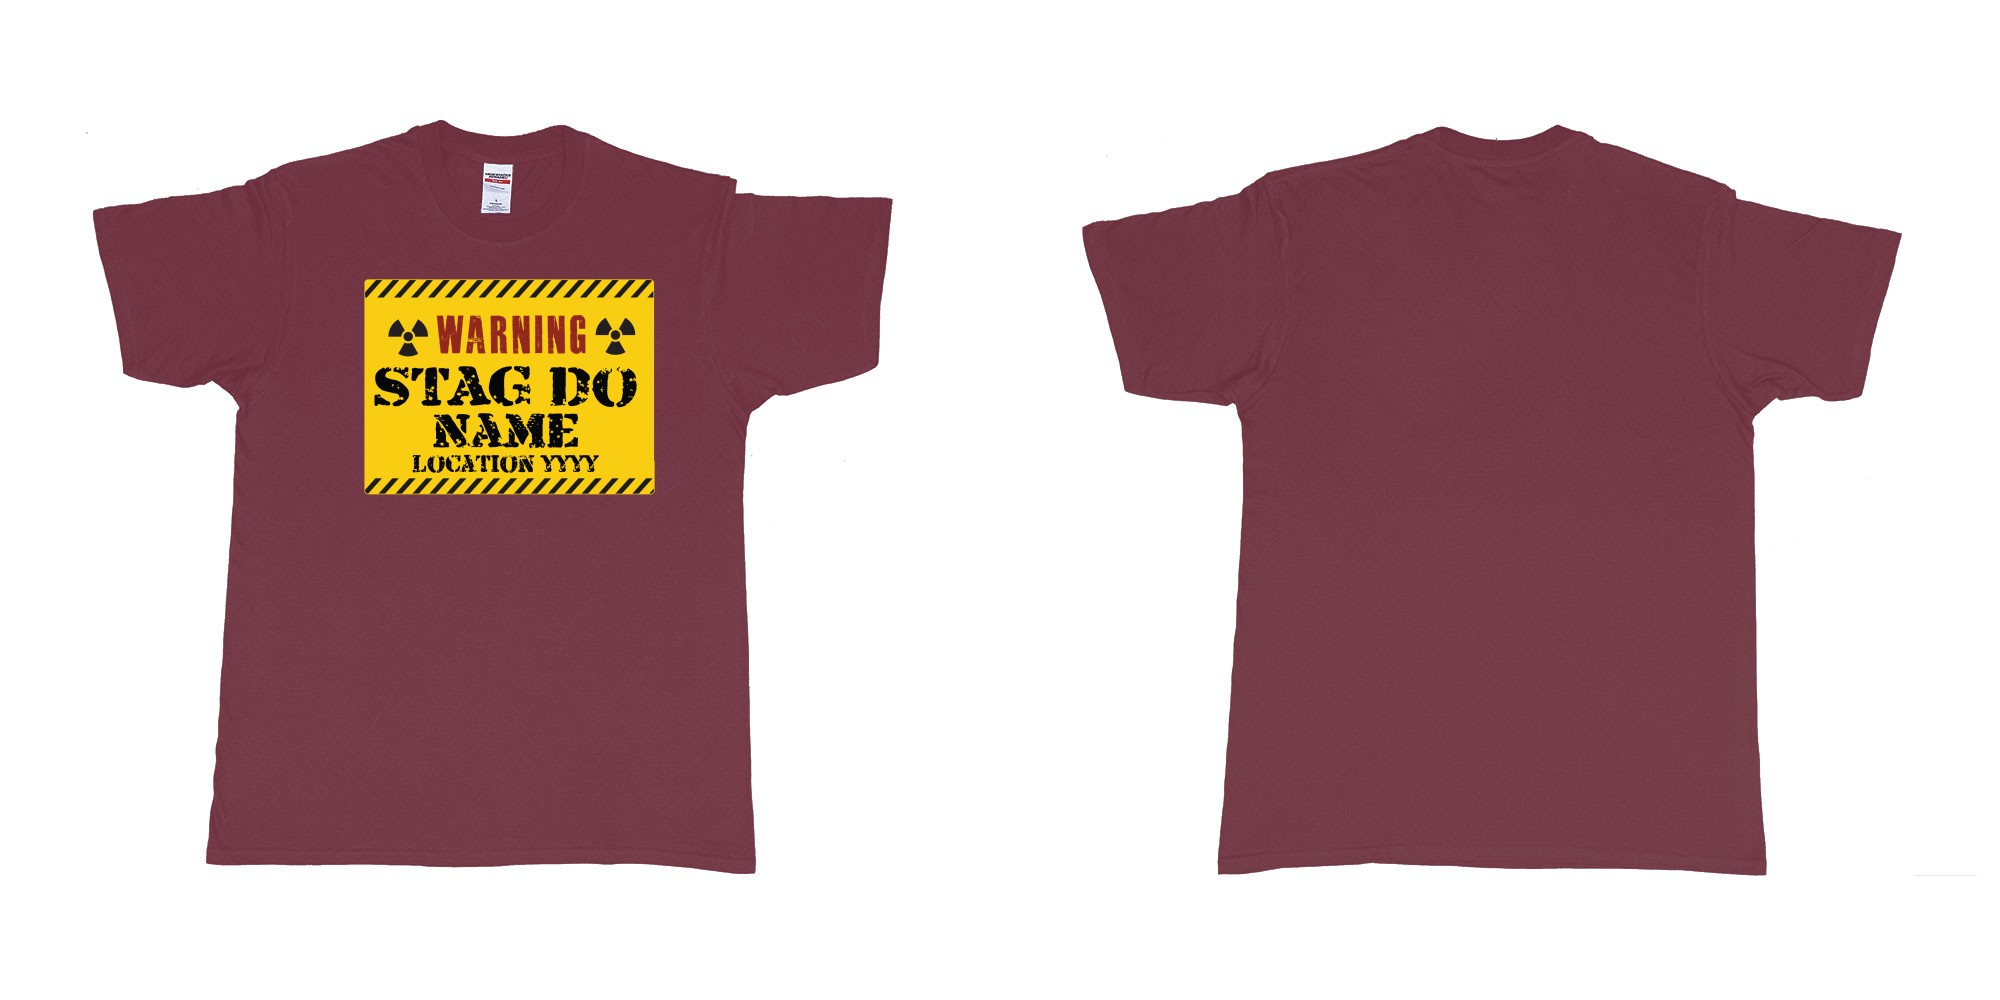 Custom tshirt design Warning Stag Do Location in fabric color marron choice your own text made in Bali by The Pirate Way